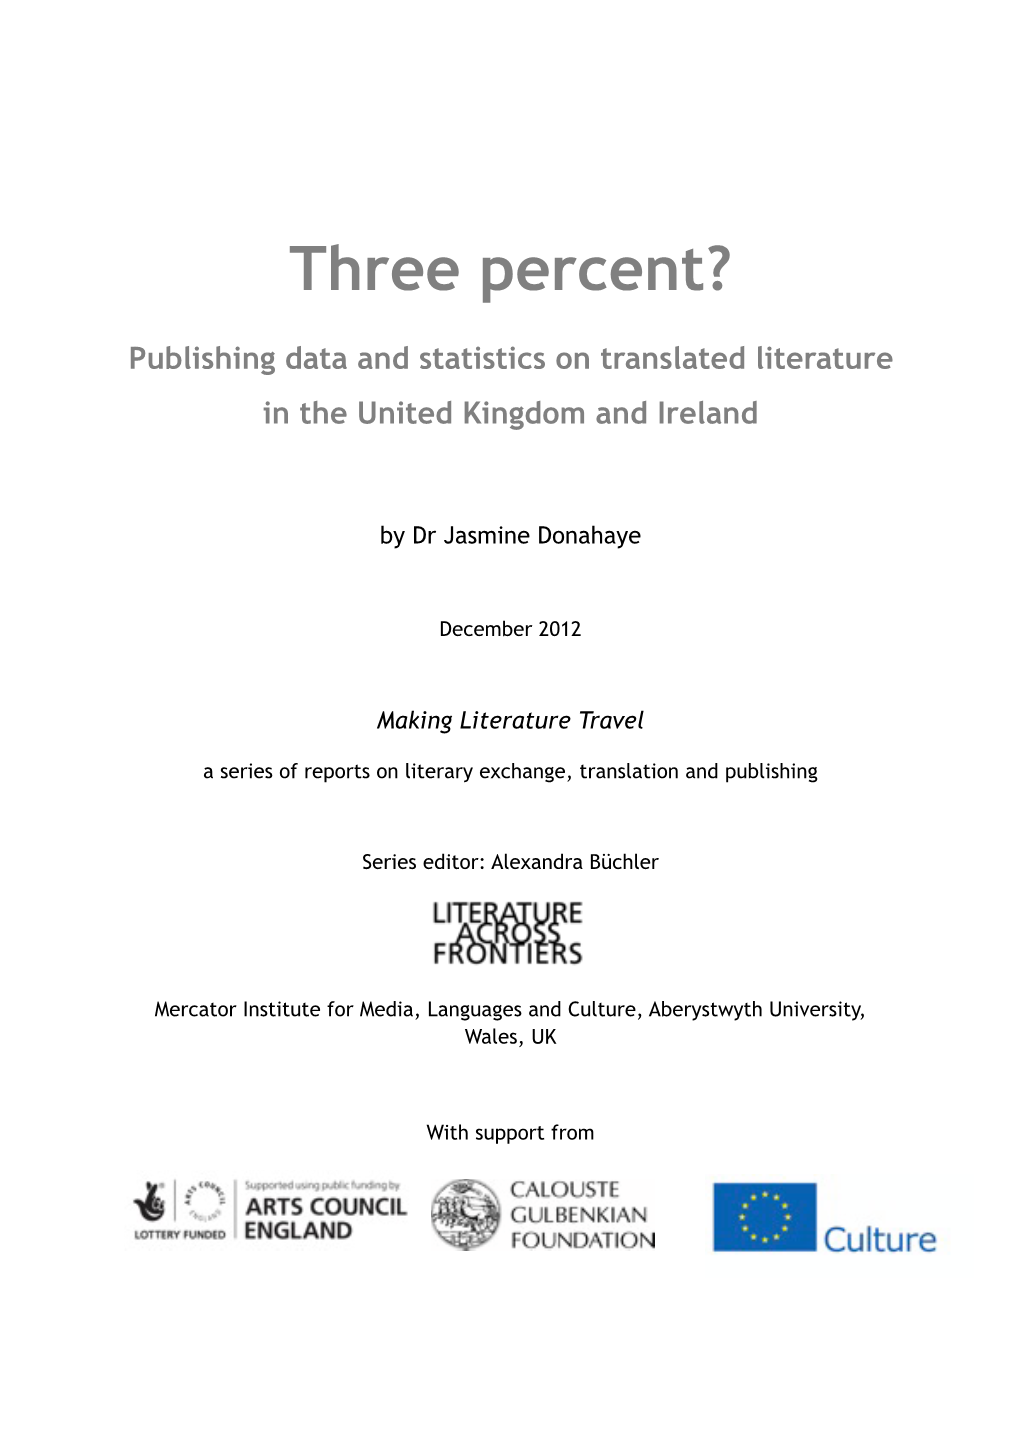 Publishing Data and Statistics on Translated Literature in the United Kingdom and Ireland